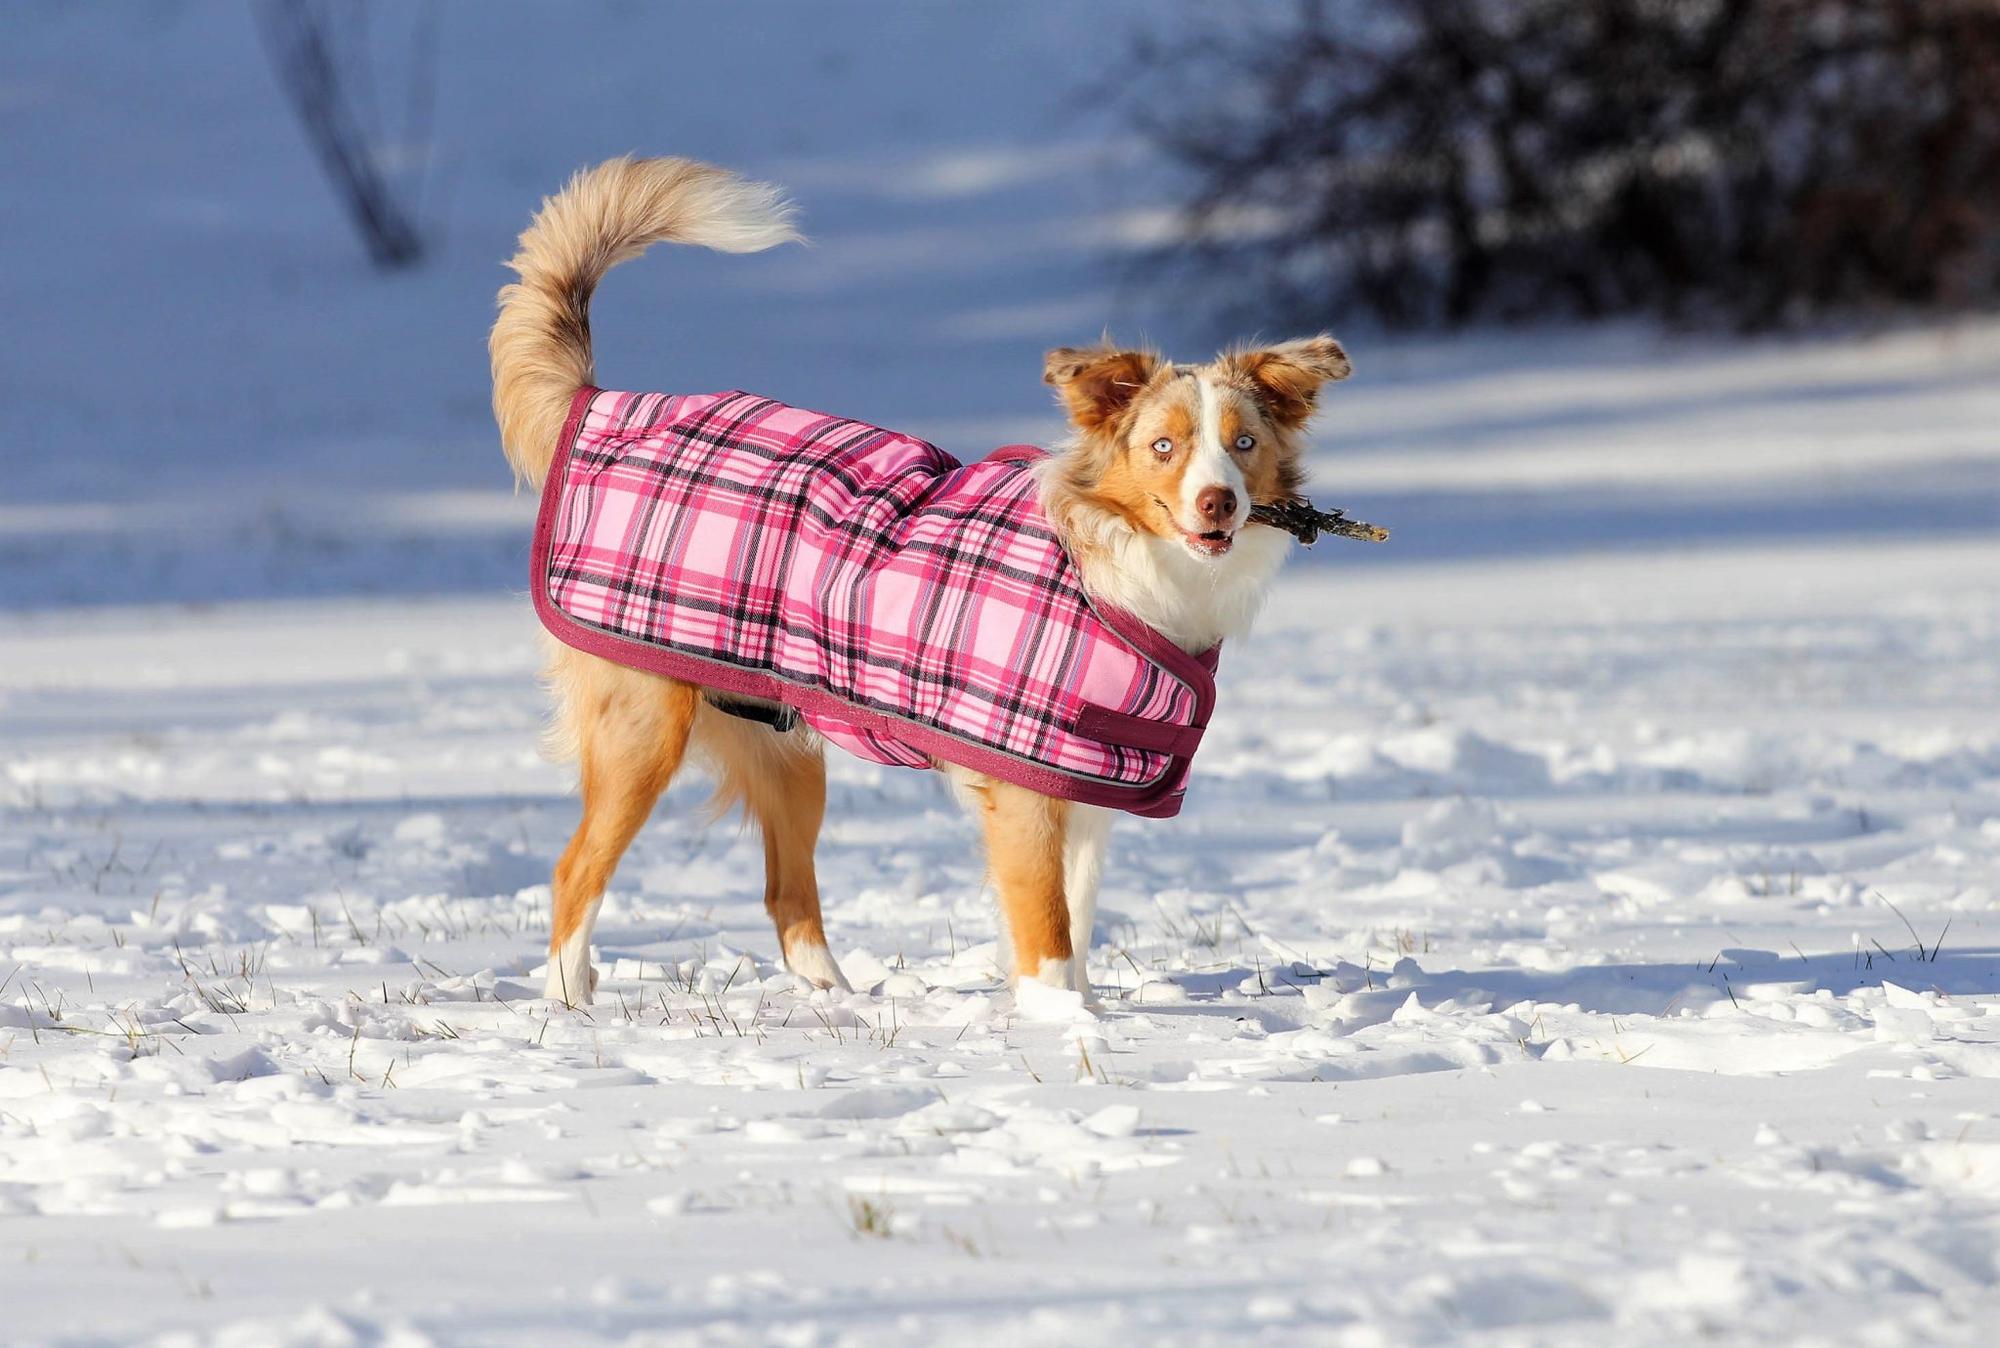 The Ontario SPCA and Humane Society urges caution in cold weather to keep animals safe